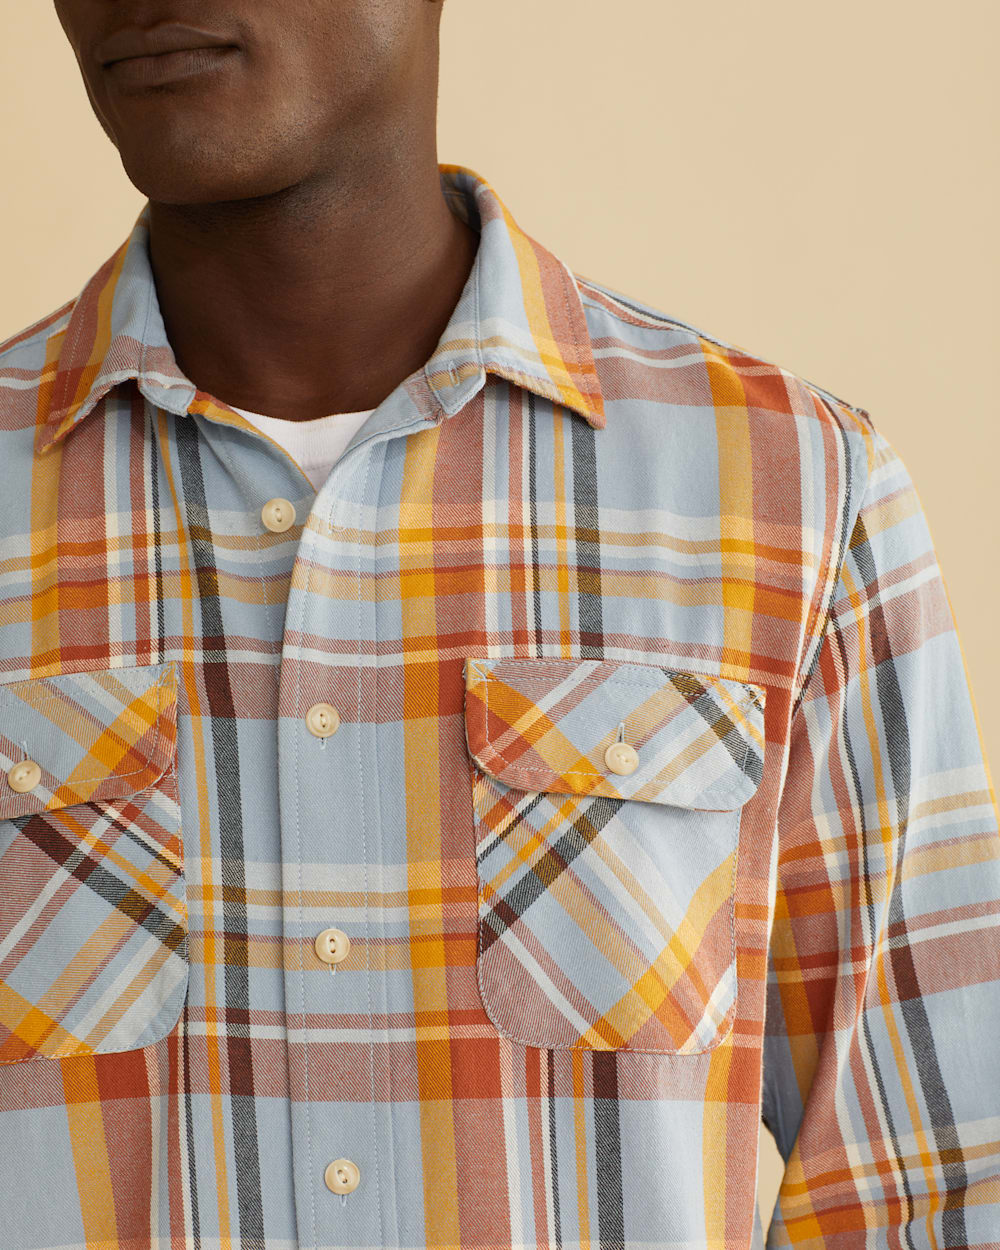 ALTERNATE VIEW OF MEN'S PLAID BEACH SHACK COTTON SHIRT IN LIGHT BLUE/RUST/GOLD PLAID image number 2